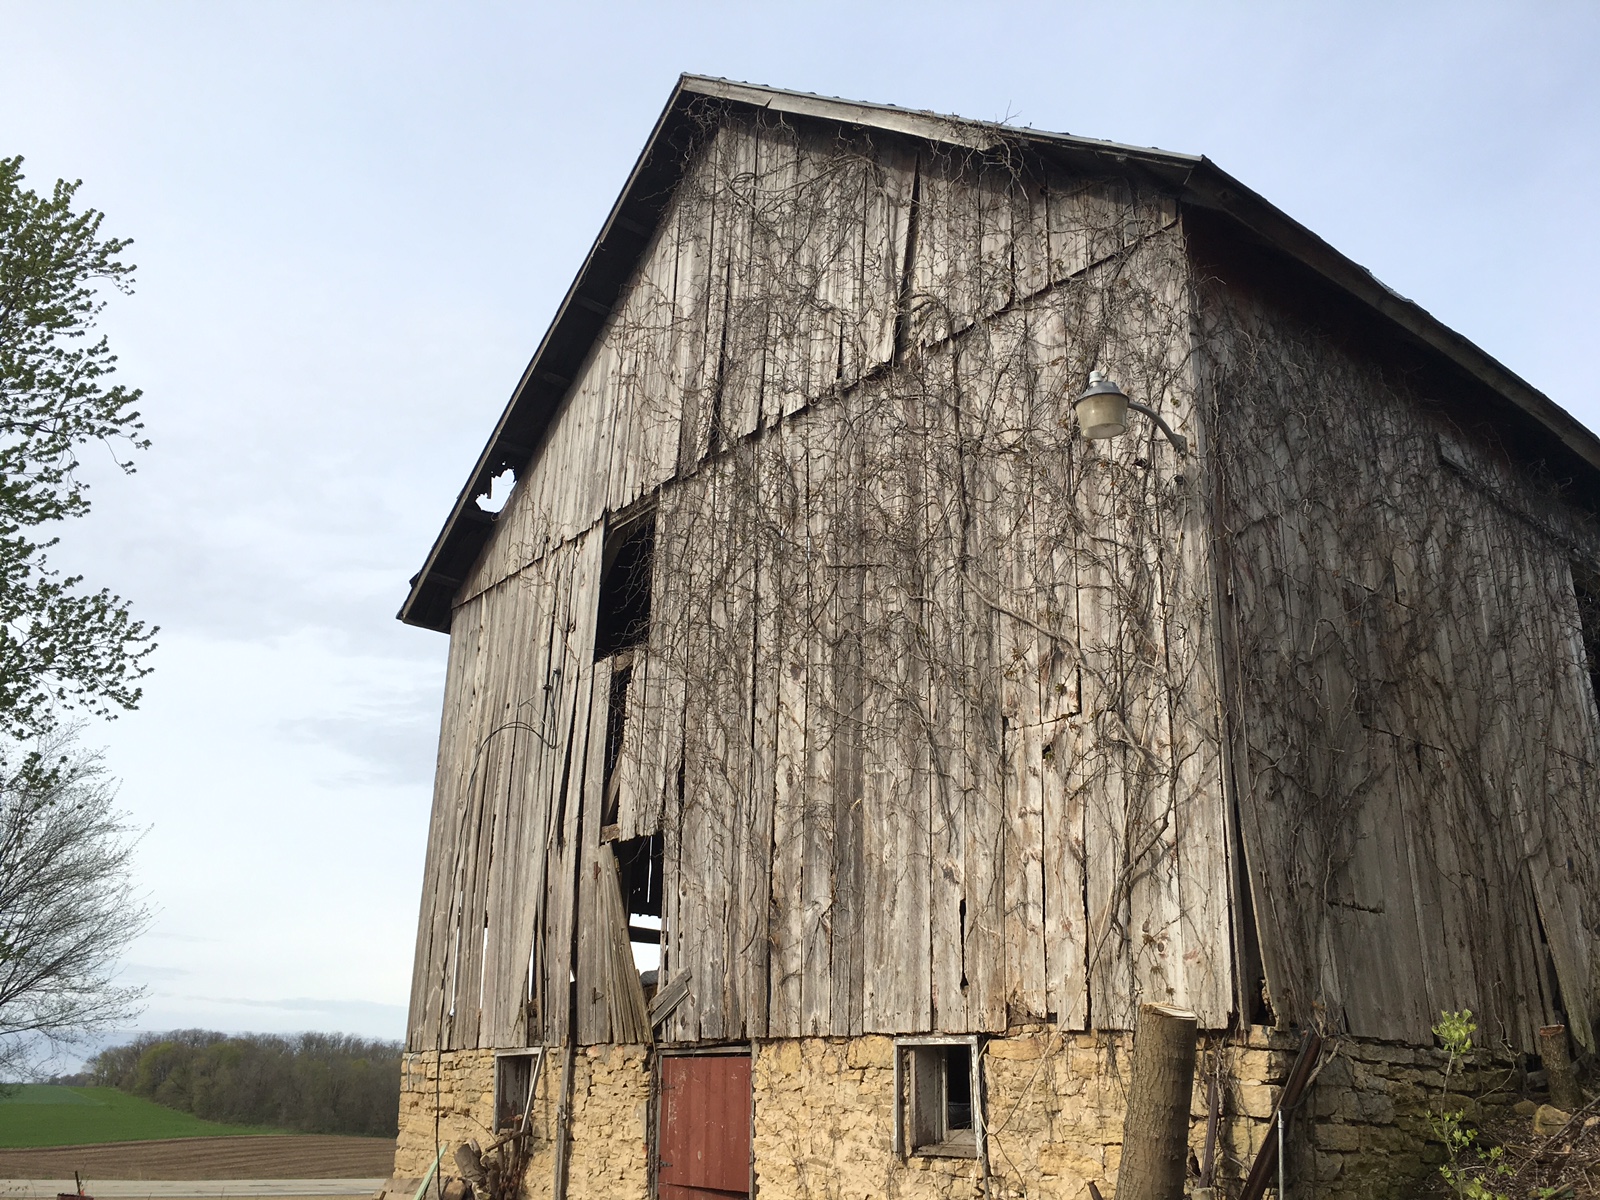 100+ year old barns are dismantled and repurposed.